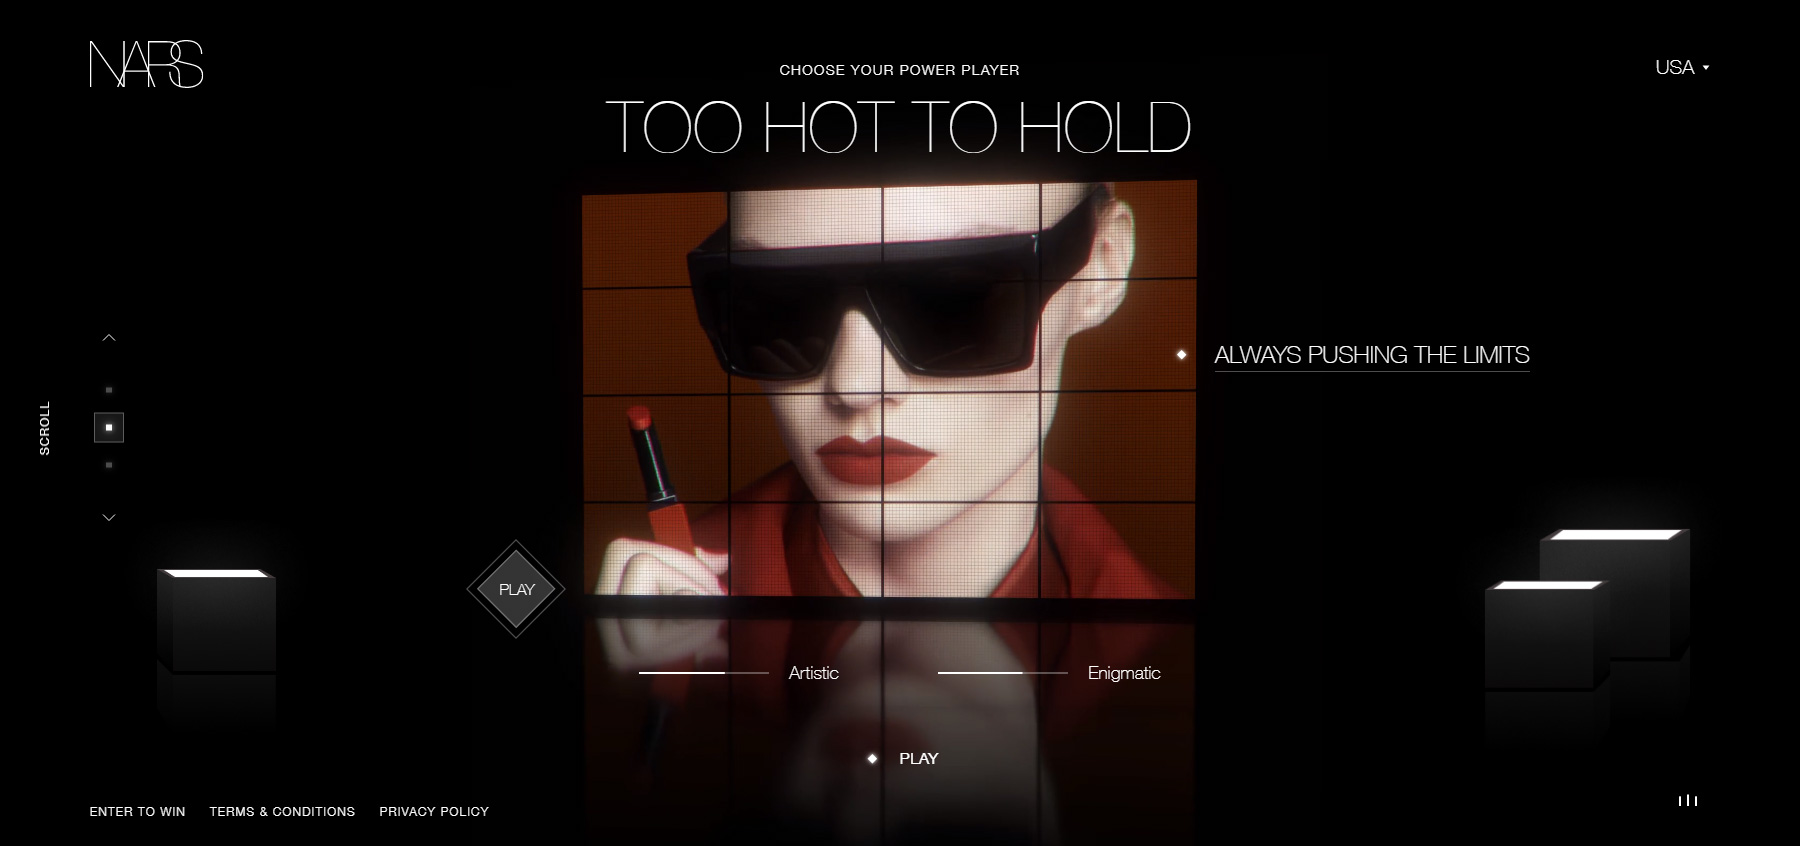 NARS - Play Your Power - Website of the Day